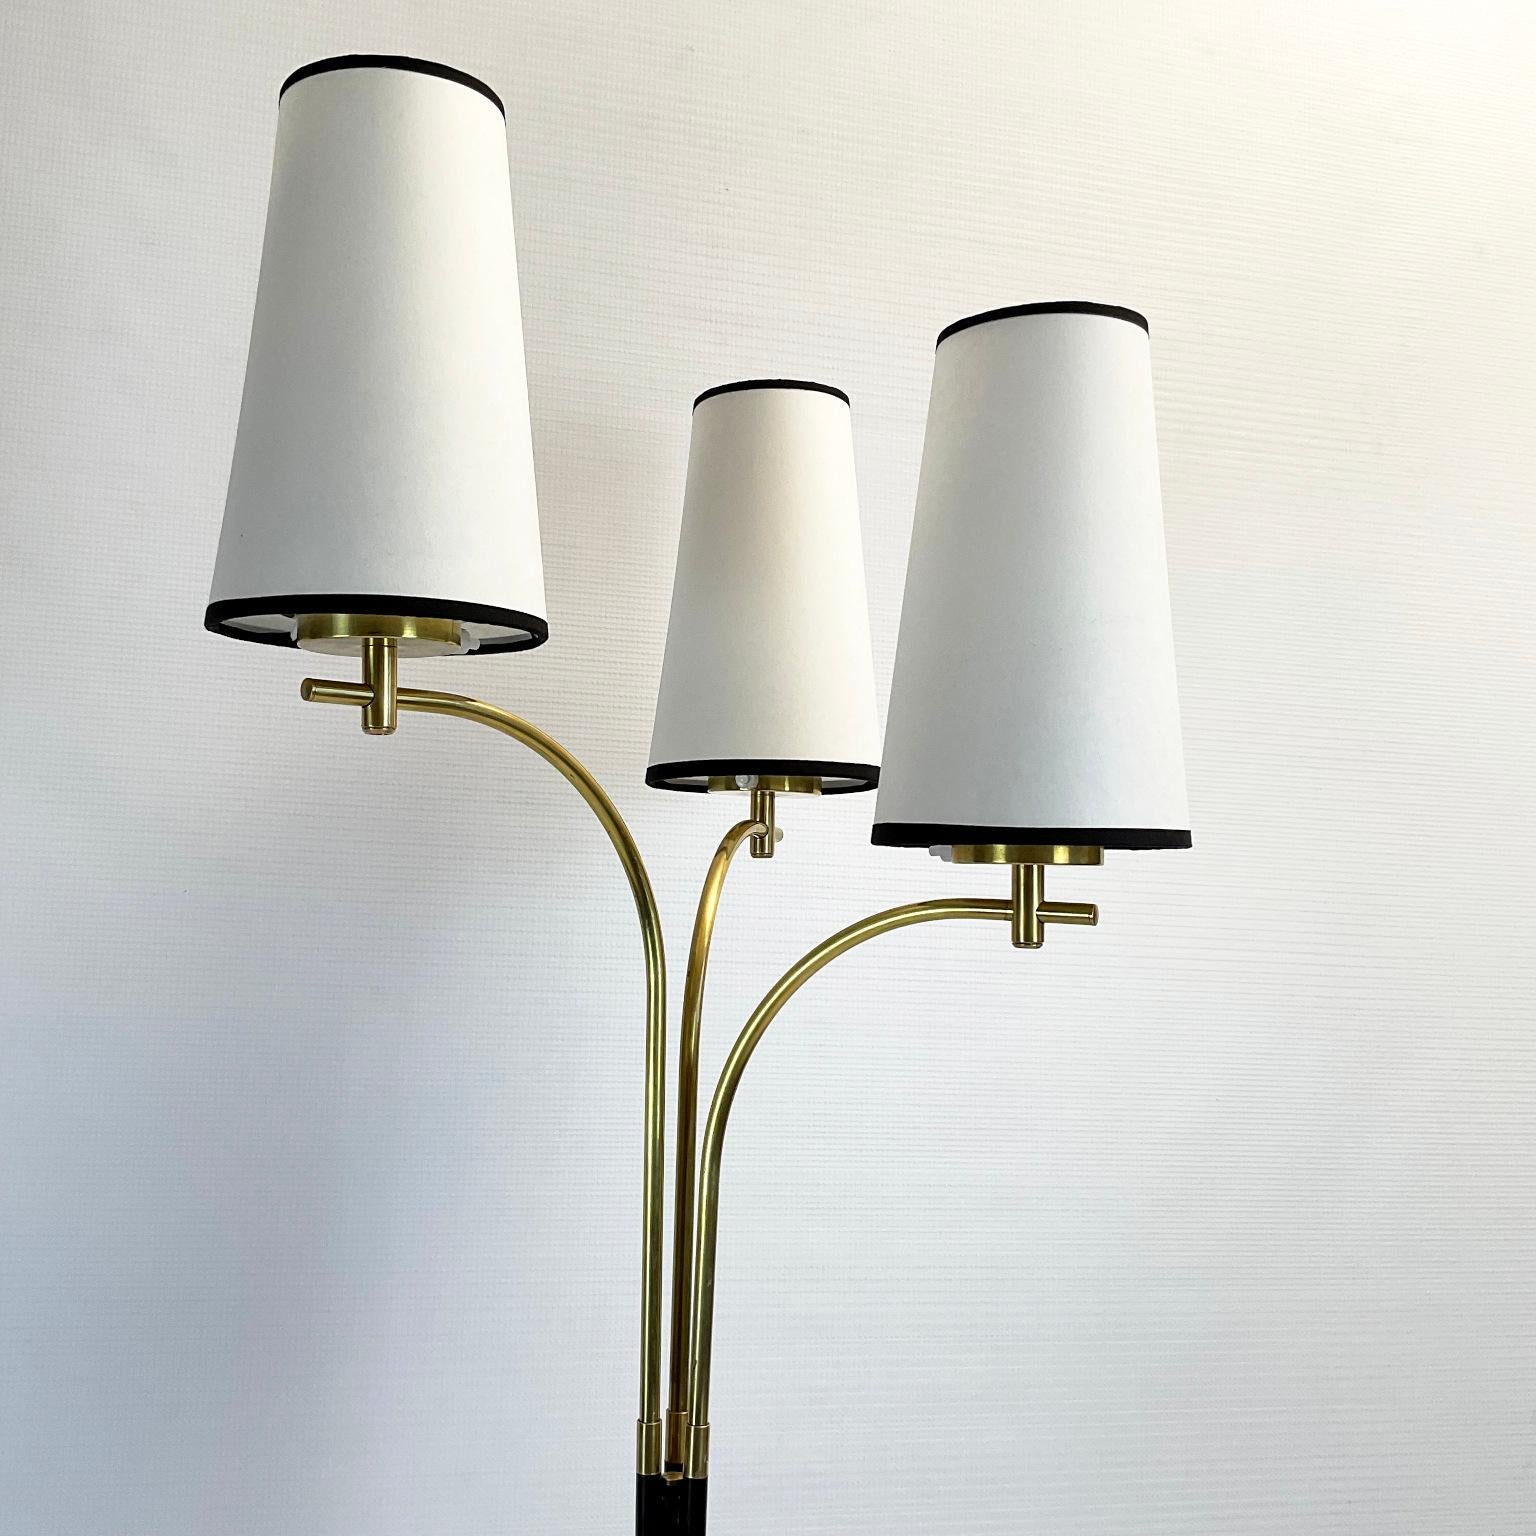 French 1950s Floor Lamp Attributed to Maison Lunel France For Sale